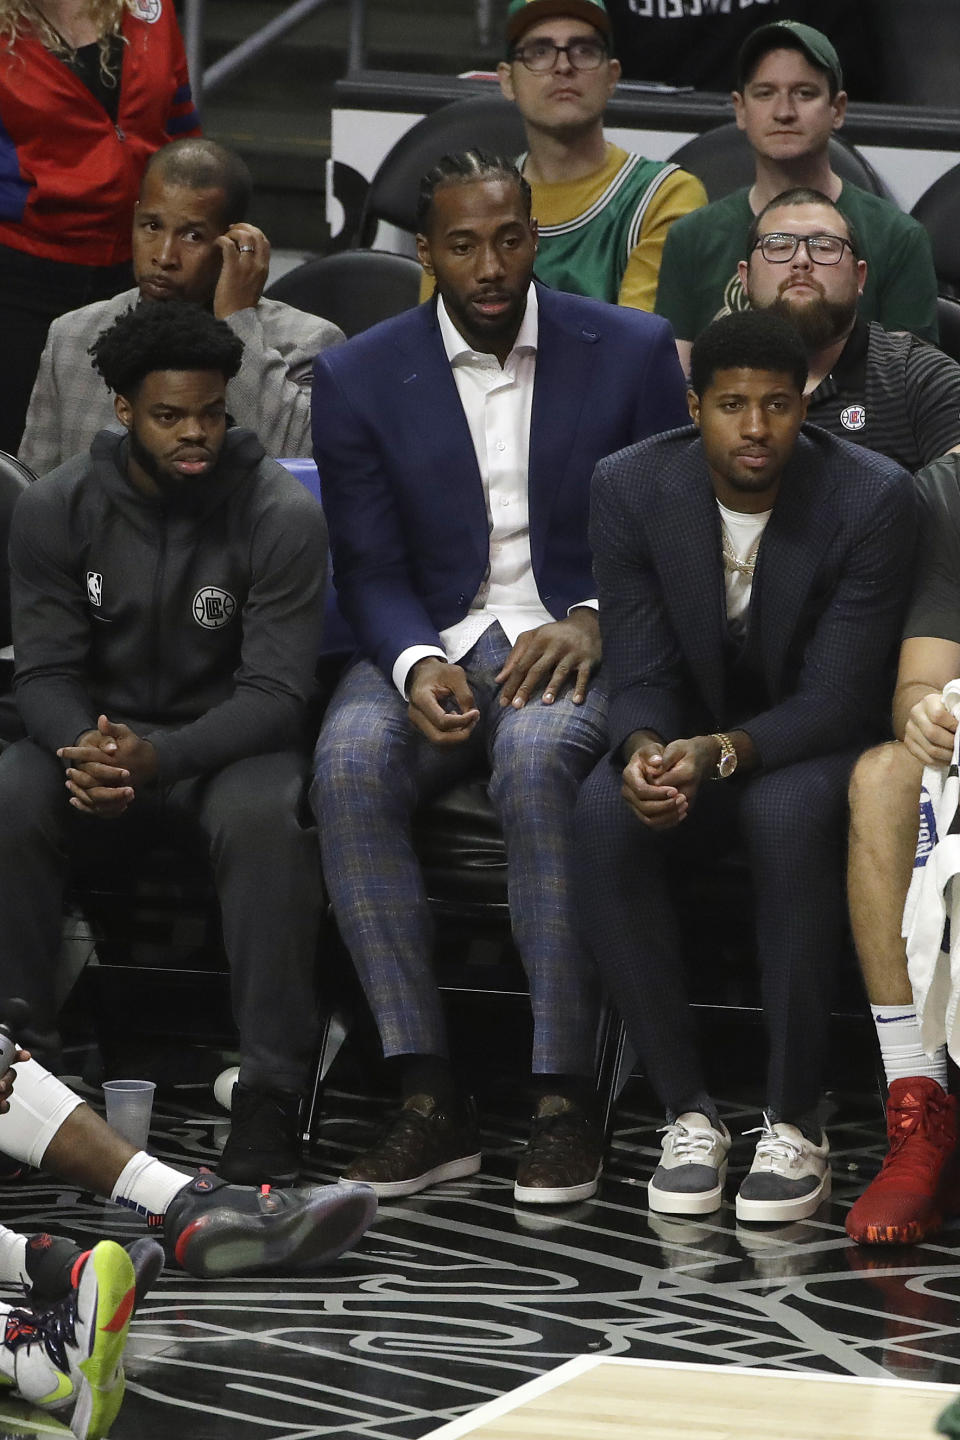 Los Angeles Clippers' Kawhi Leonard, center, and Paul George, right, watch from the bench during the second half of the team's NBA basketball game against the Milwaukee Bucks on Wednesday, Nov. 6, 2019, in Los Angeles. (AP Photo/Marcio Jose Sanchez)